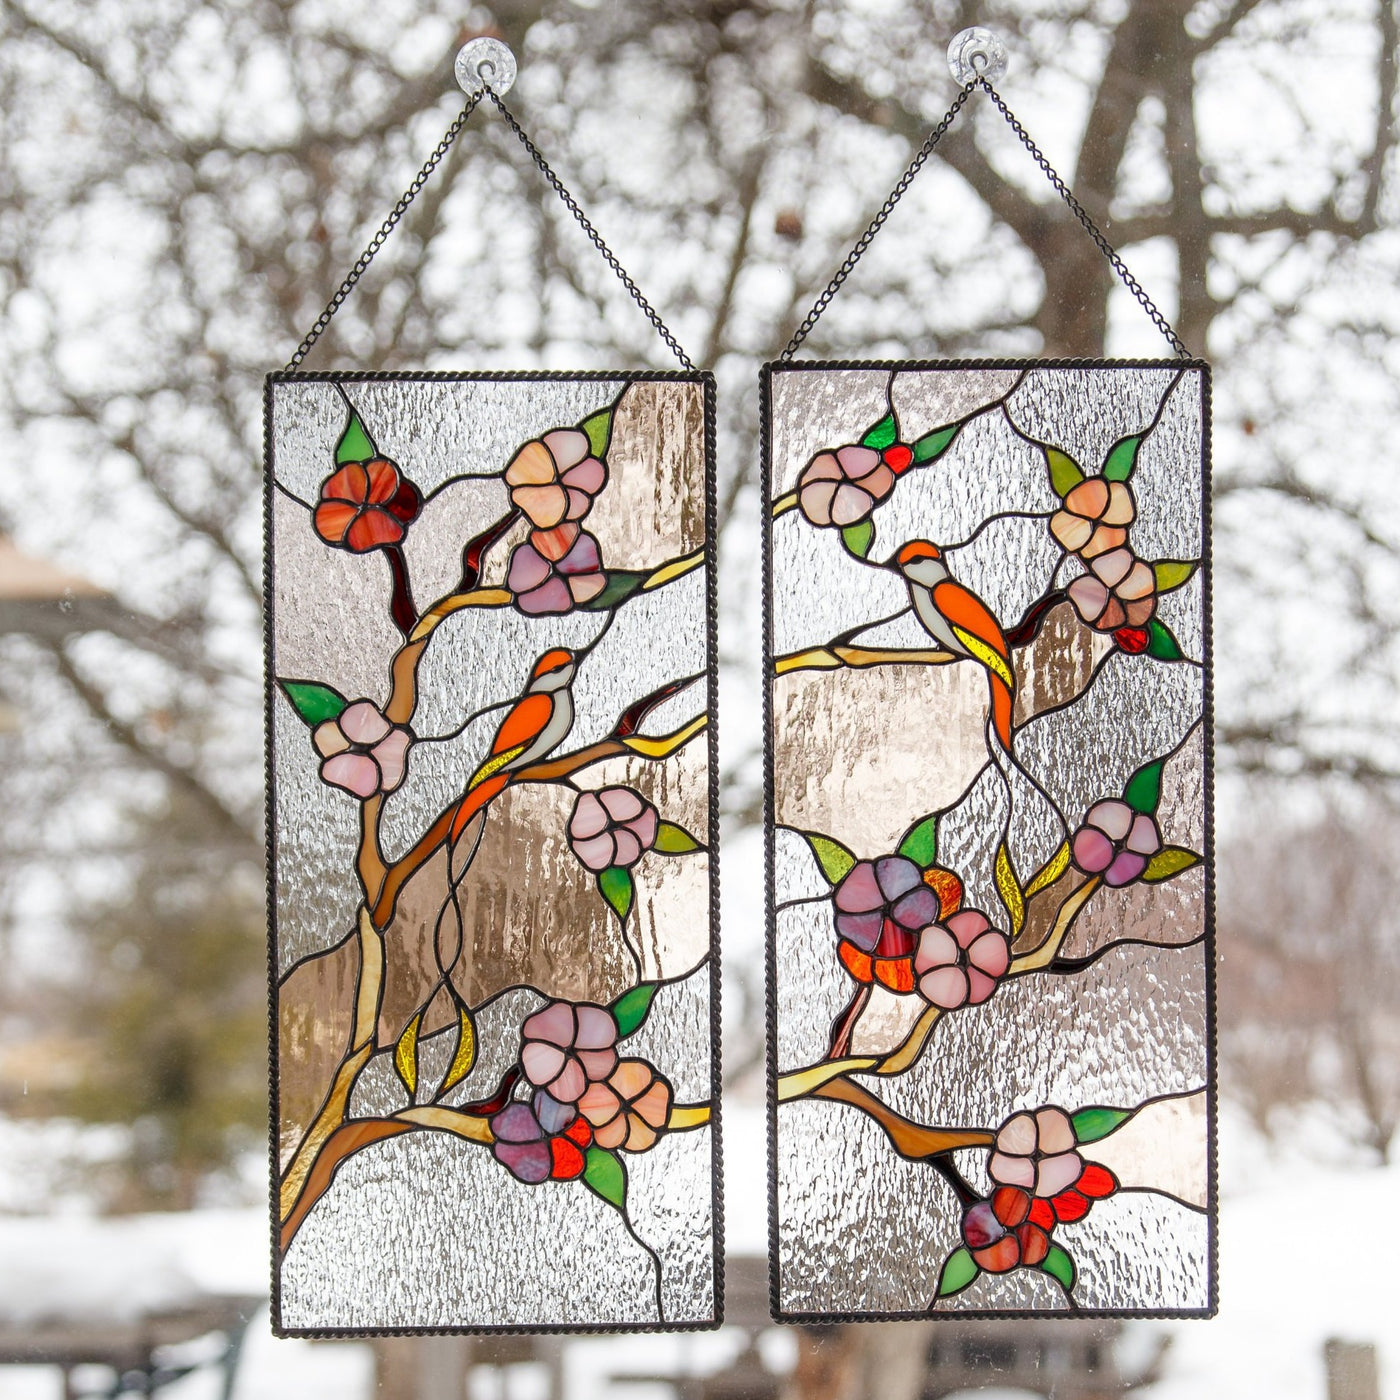 Stained glass cherry blossom panels for home decor